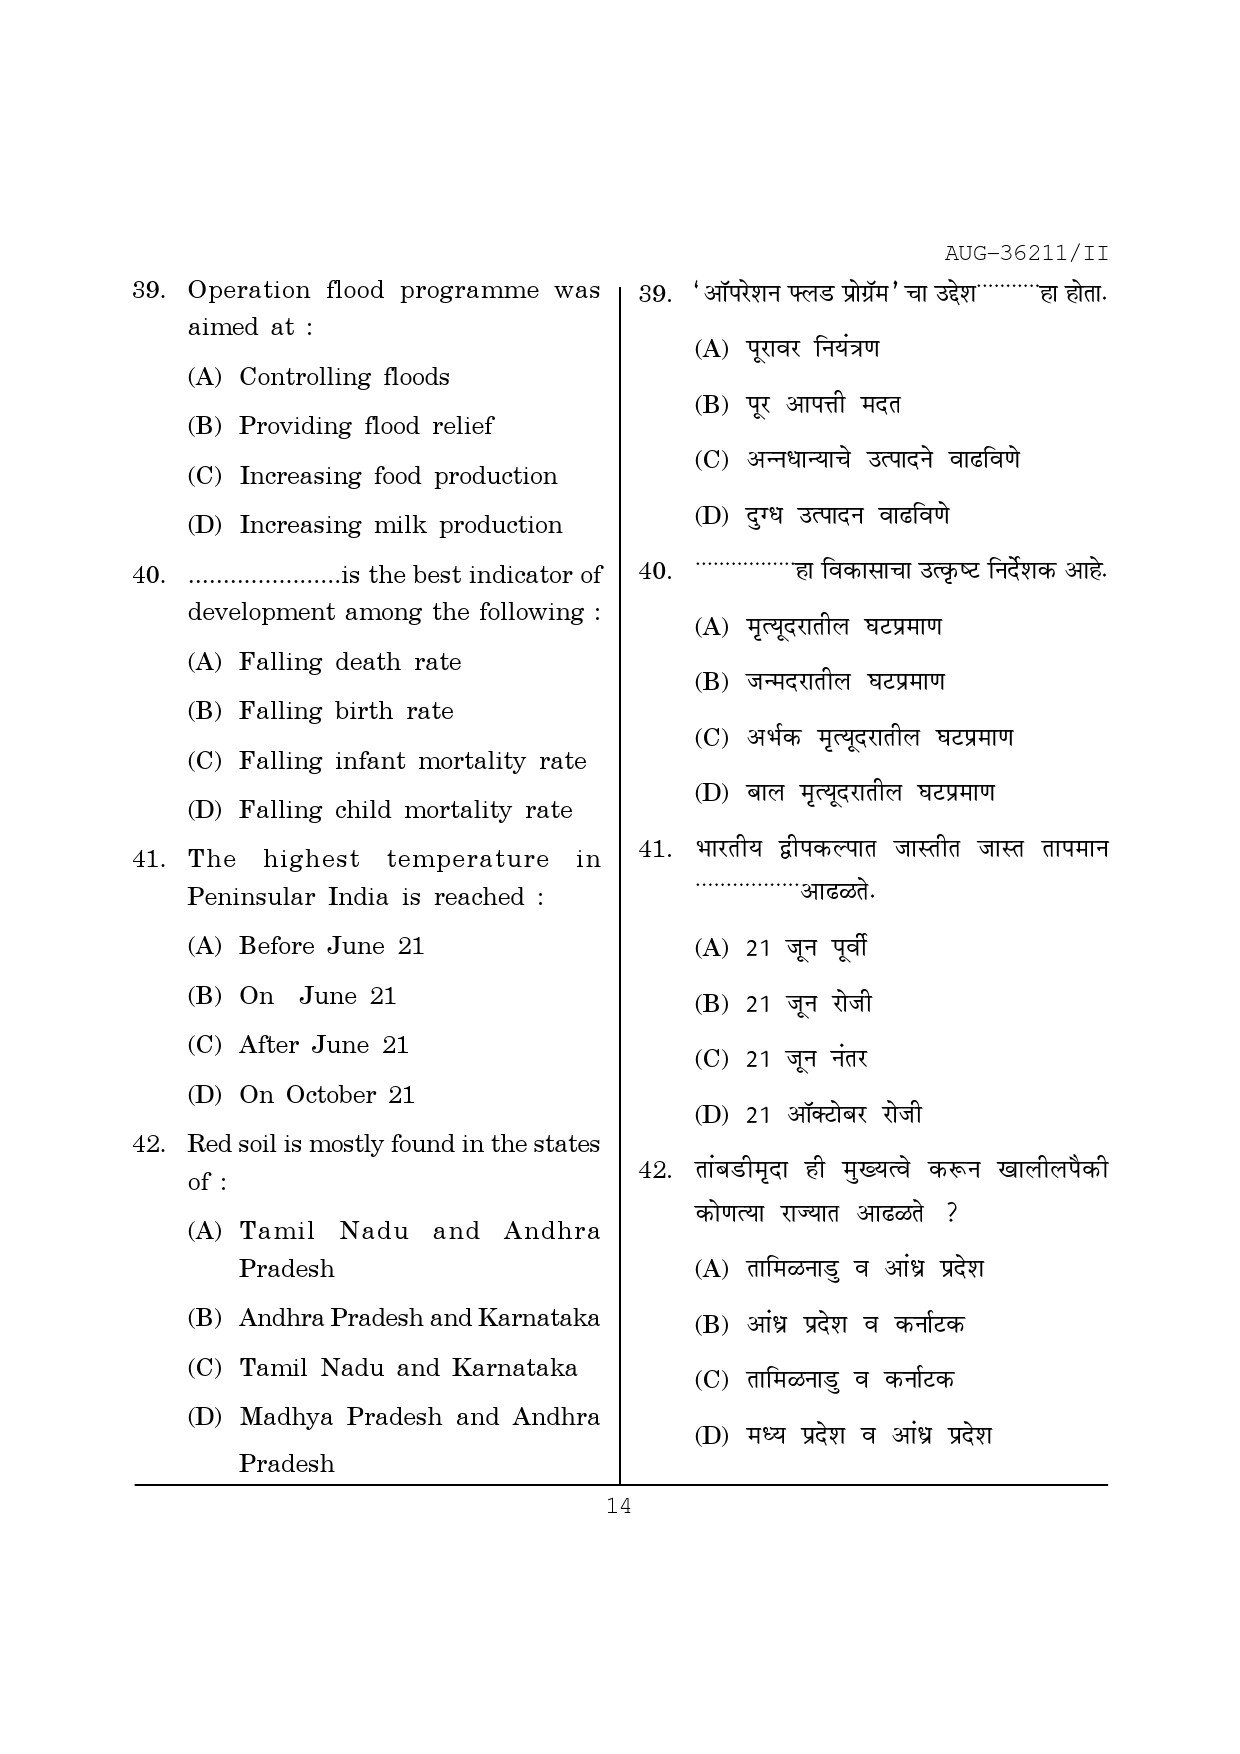 Maharashtra SET Geography Question Paper II August 2011 14